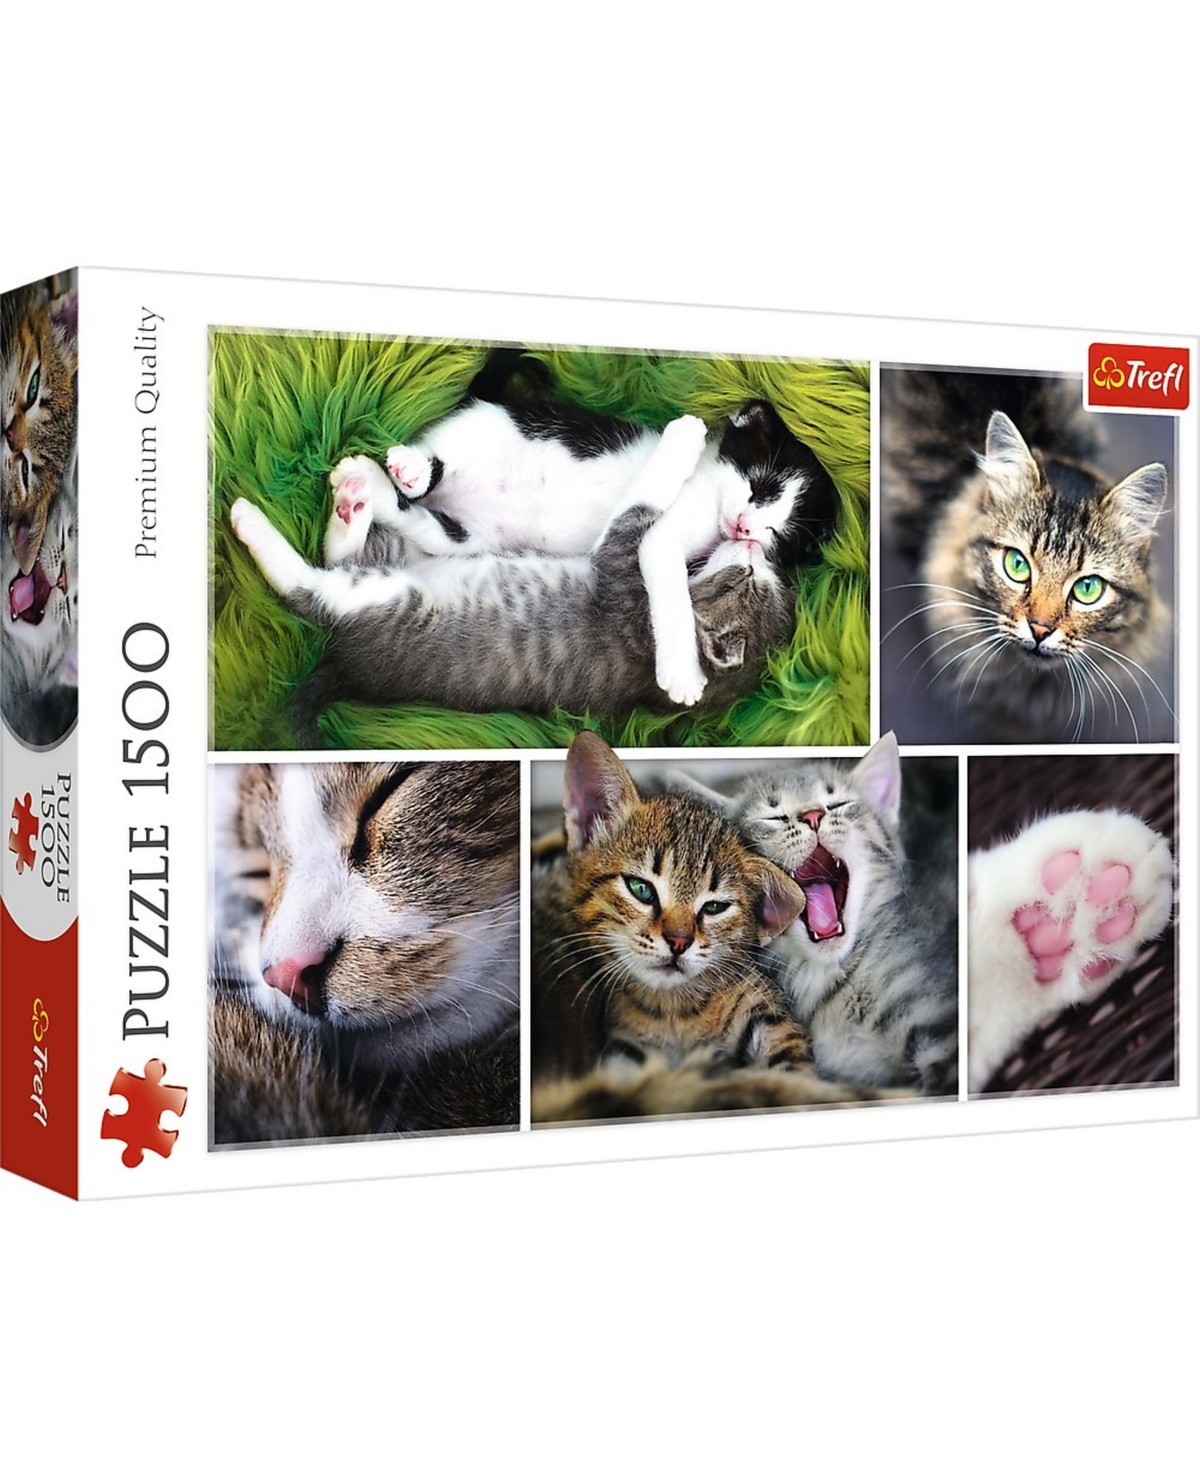 Trefl Jigsaw Puzzle Just Cat Things Collage, 1500 Piece In Multi